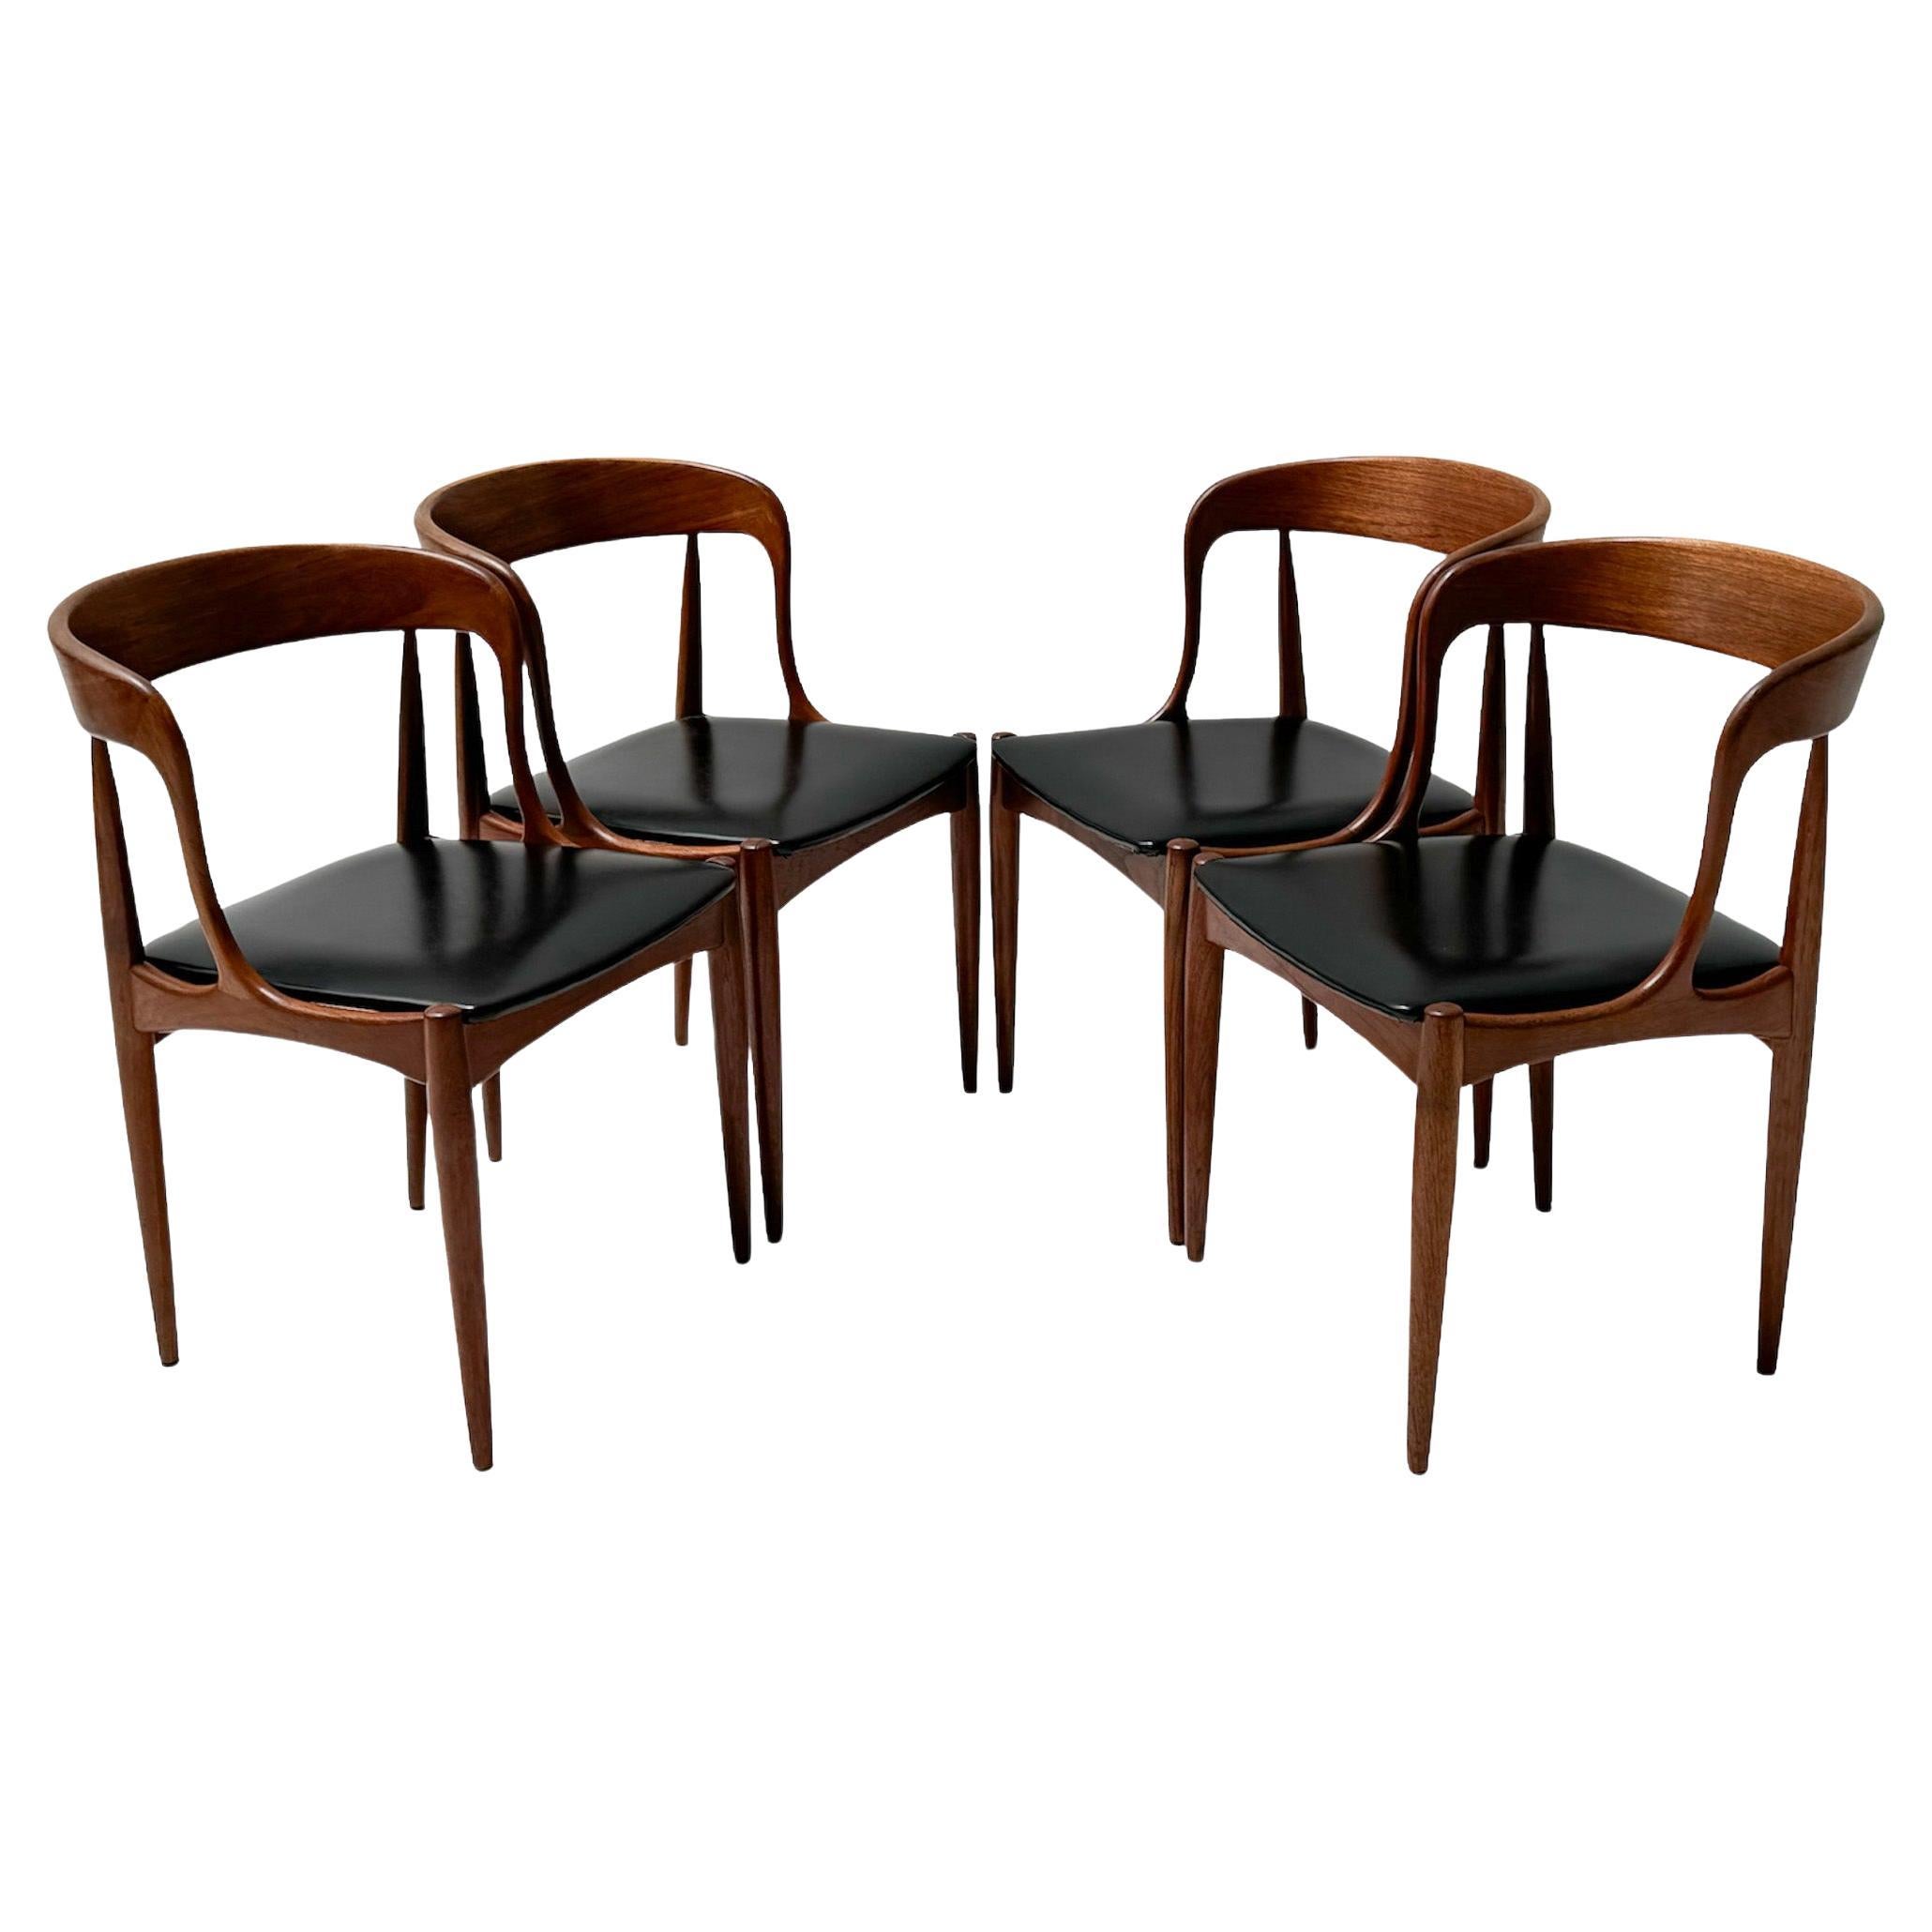 Four Teak Mid-Century Modern Dining Chairs by Johannes Andersen for Uldum, 1960s For Sale